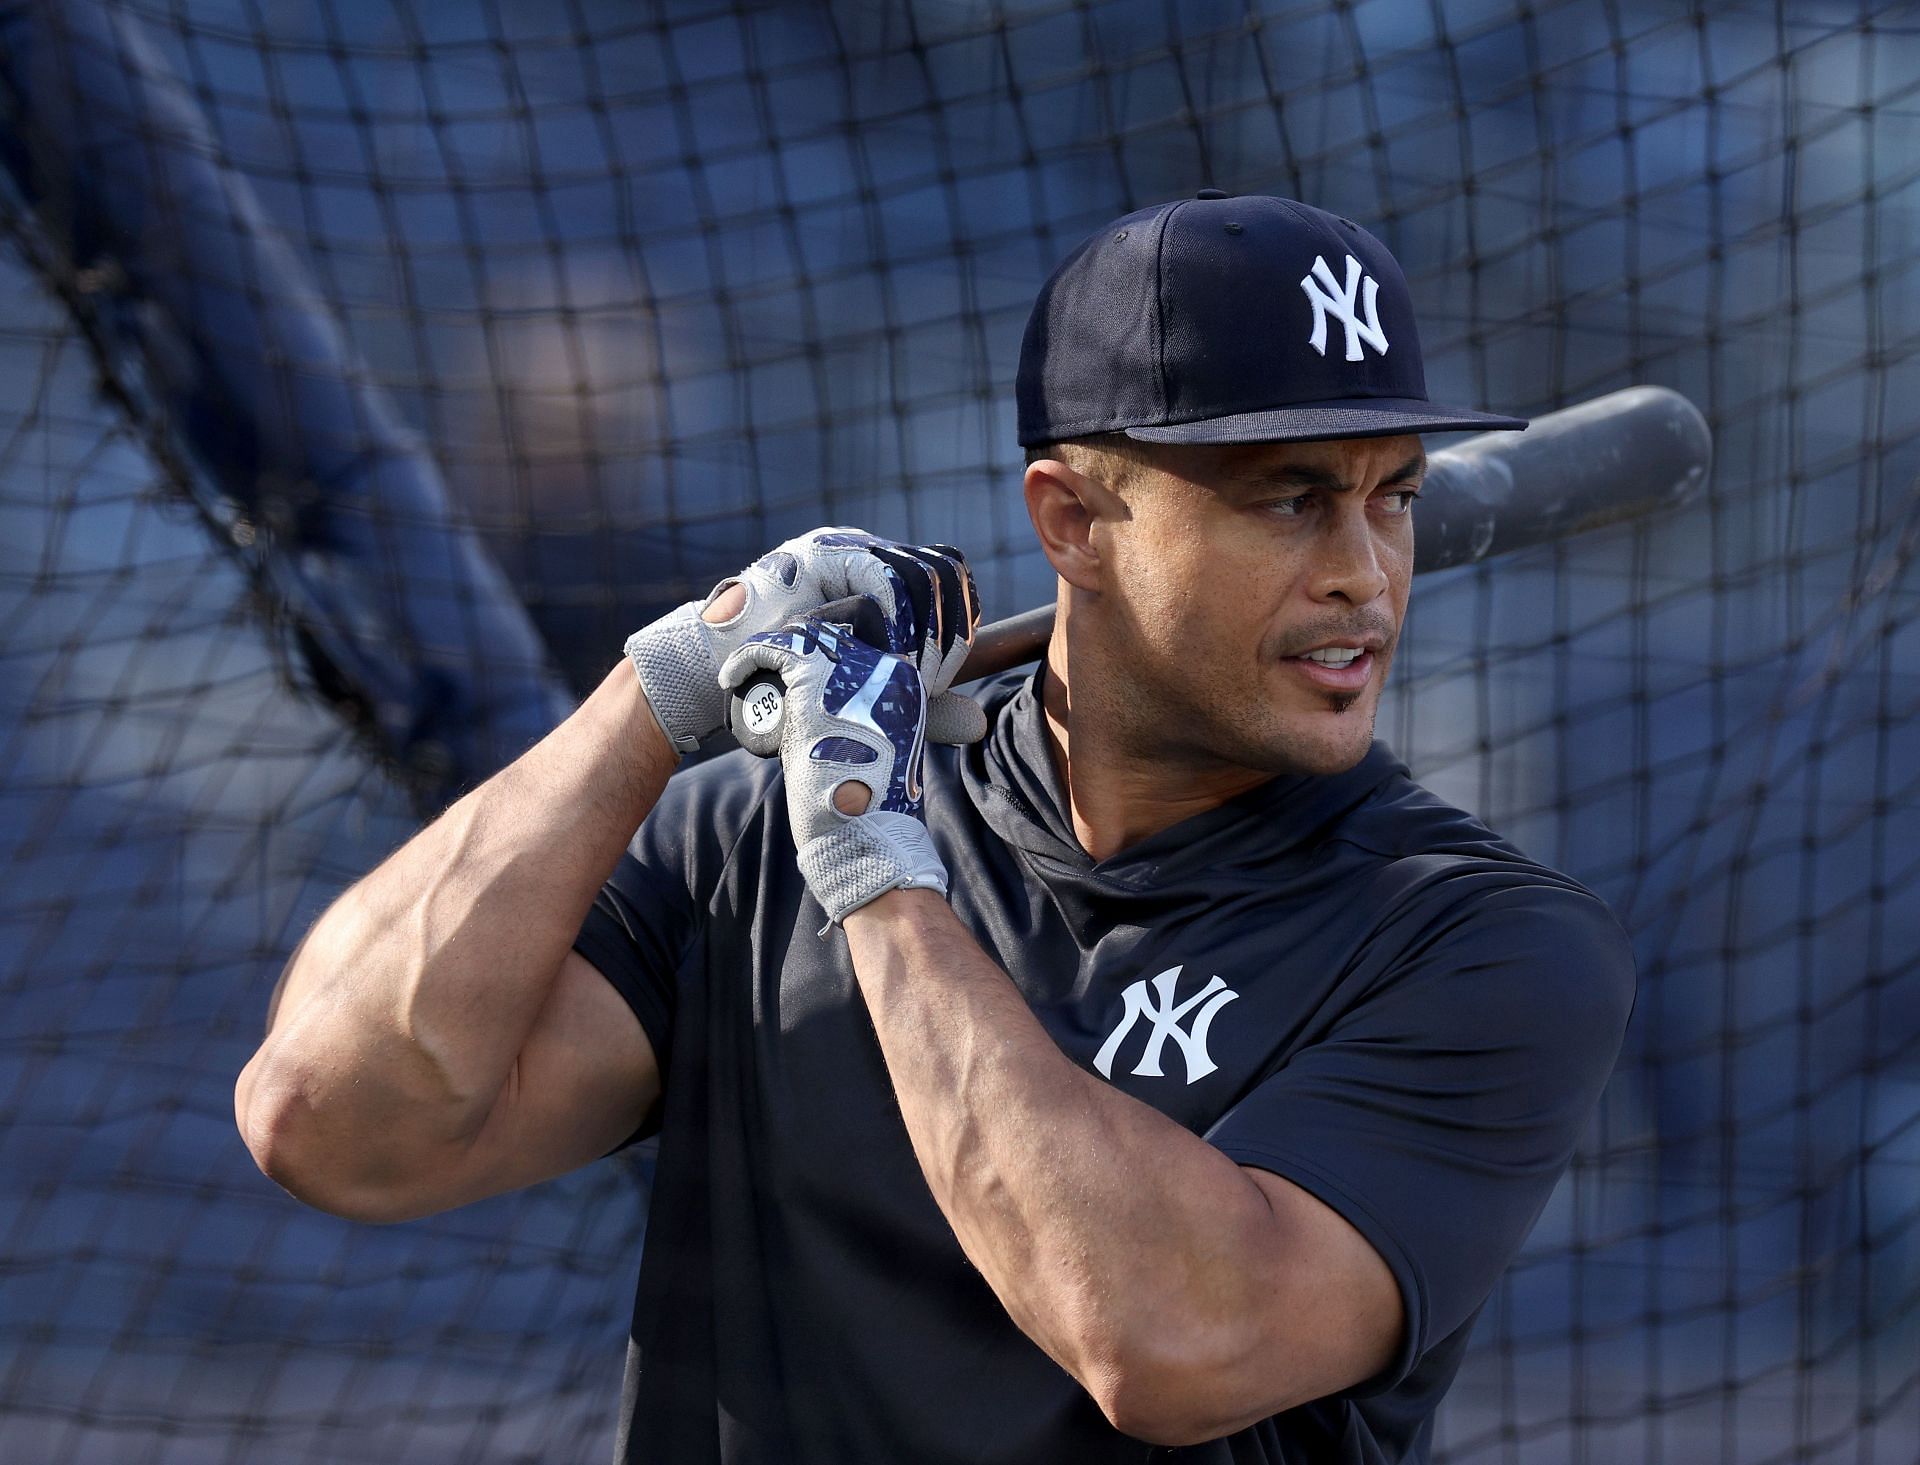 Marlins' Giancarlo Stanton open to playing for Yankees - ABC7 New York